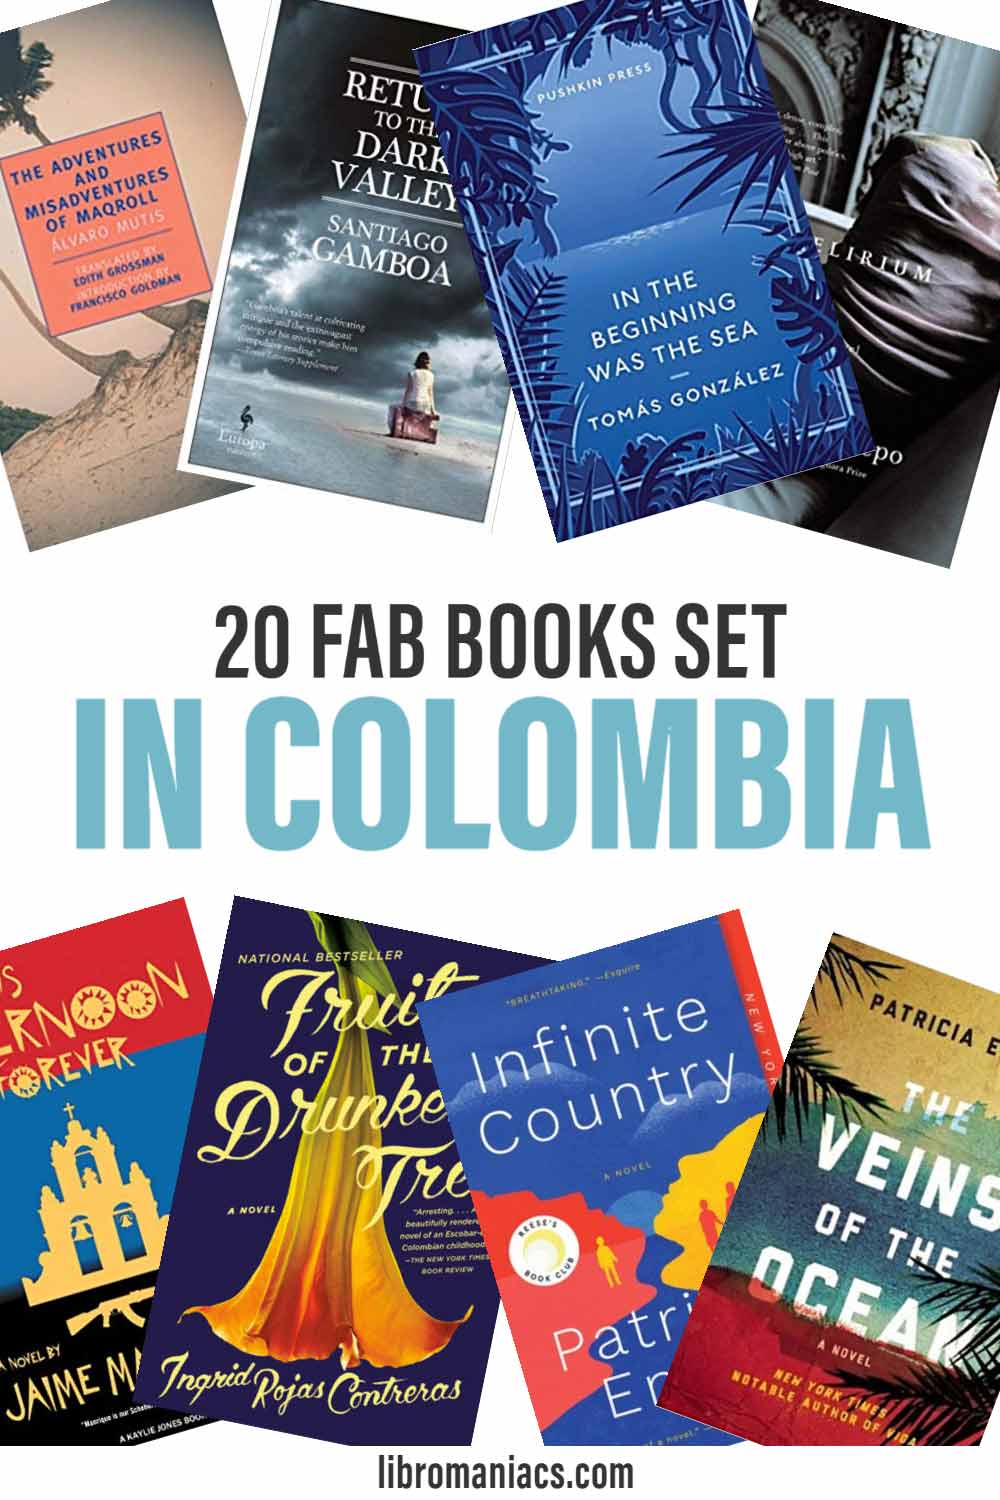 20 books set in Colombia